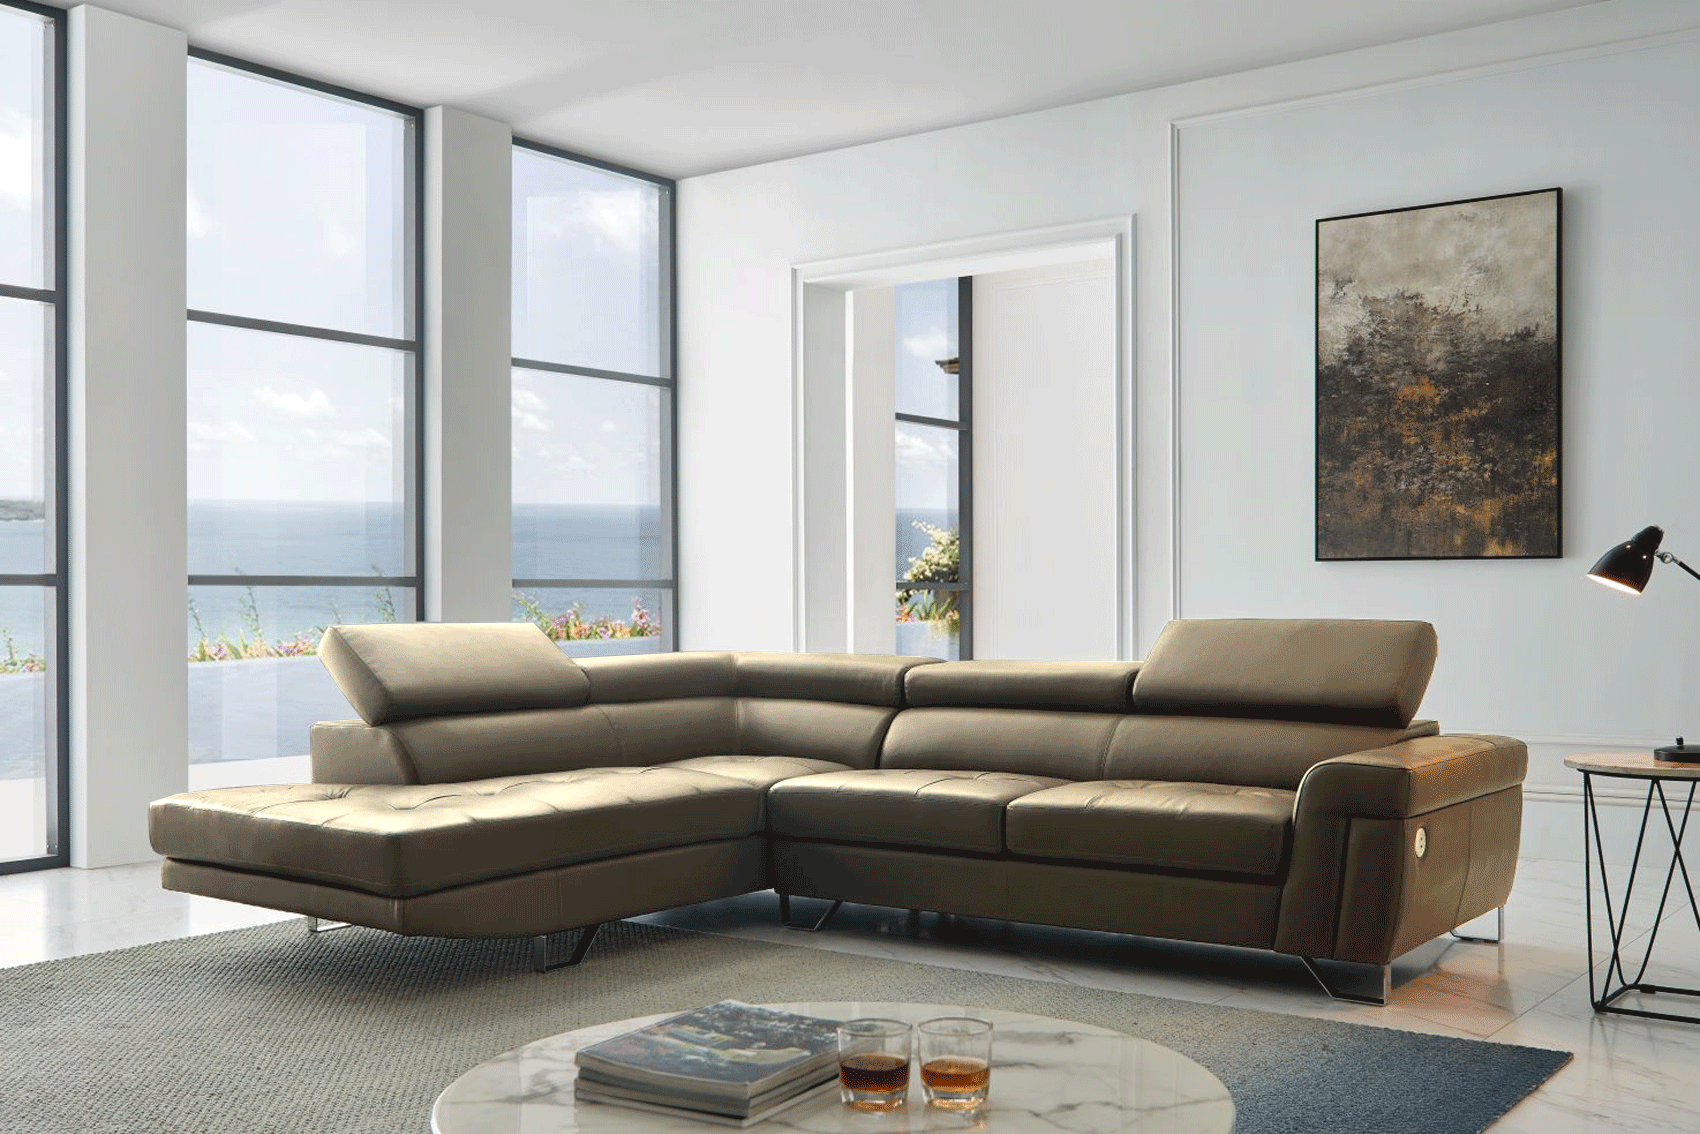 Brands ALF Capri Coffee Tables, Italy 1807 Sectional Left Taupe